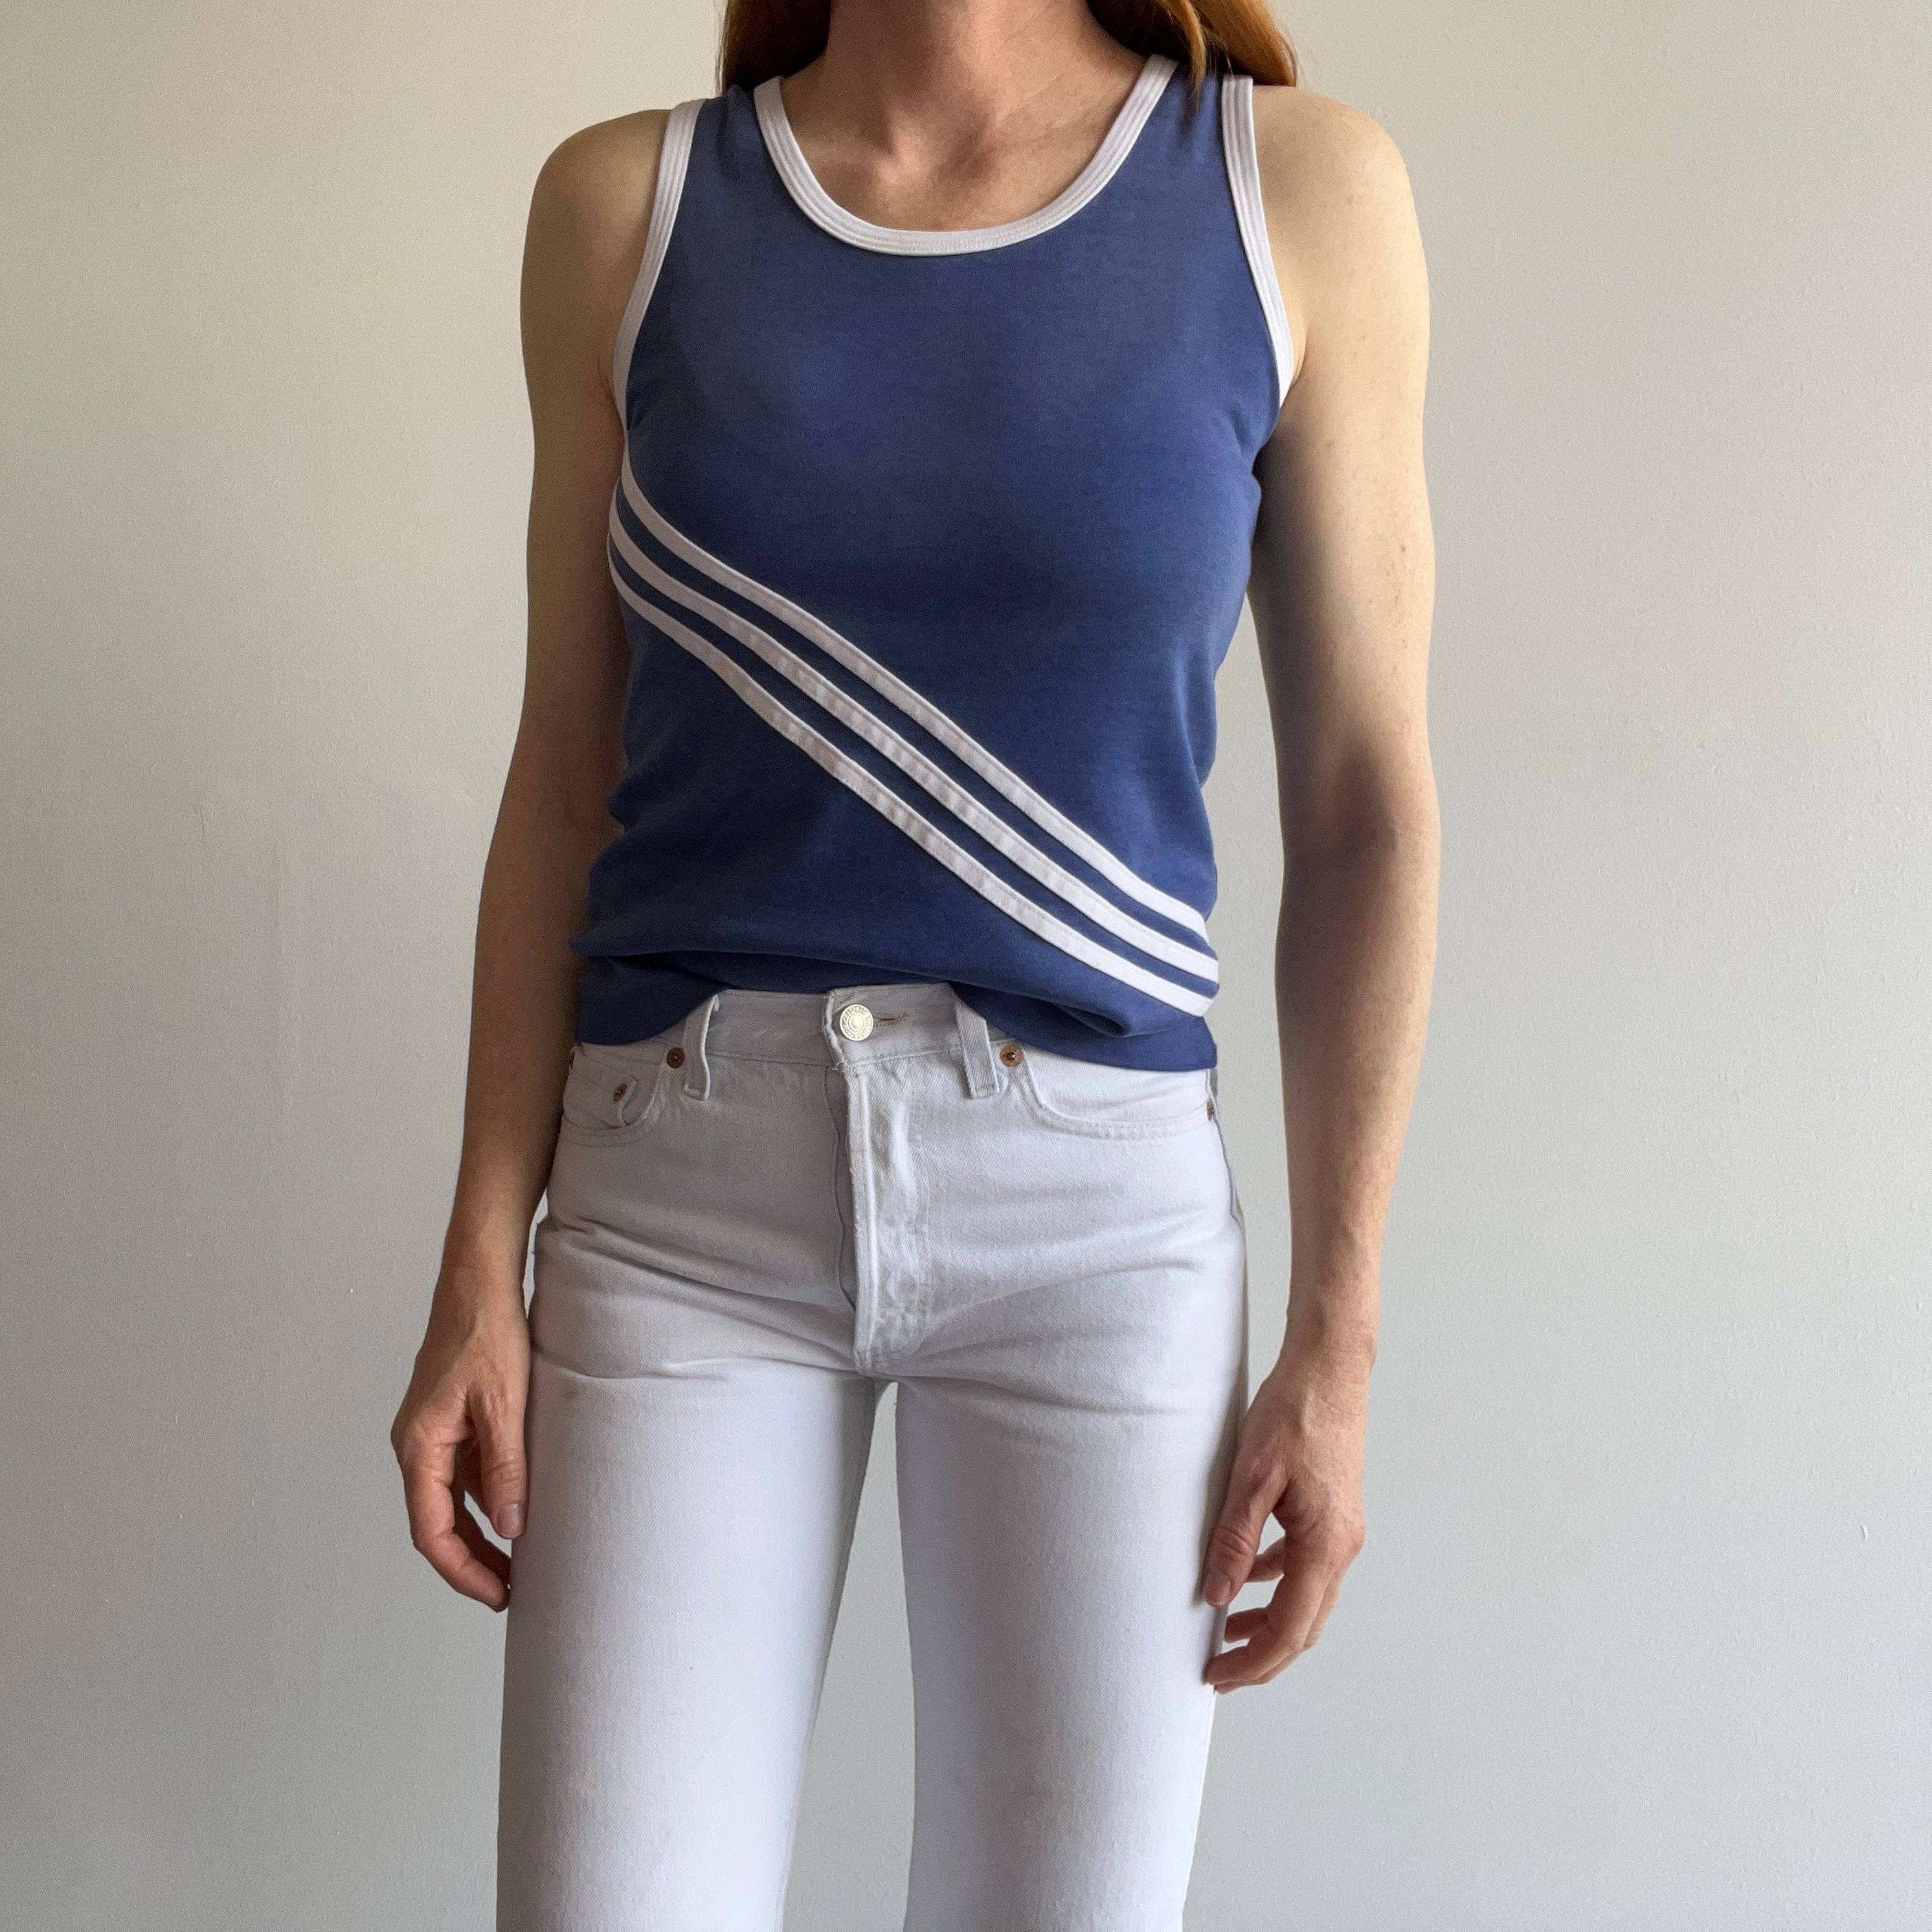 1980s Triple Stripe Fitted Tank Top - THIS